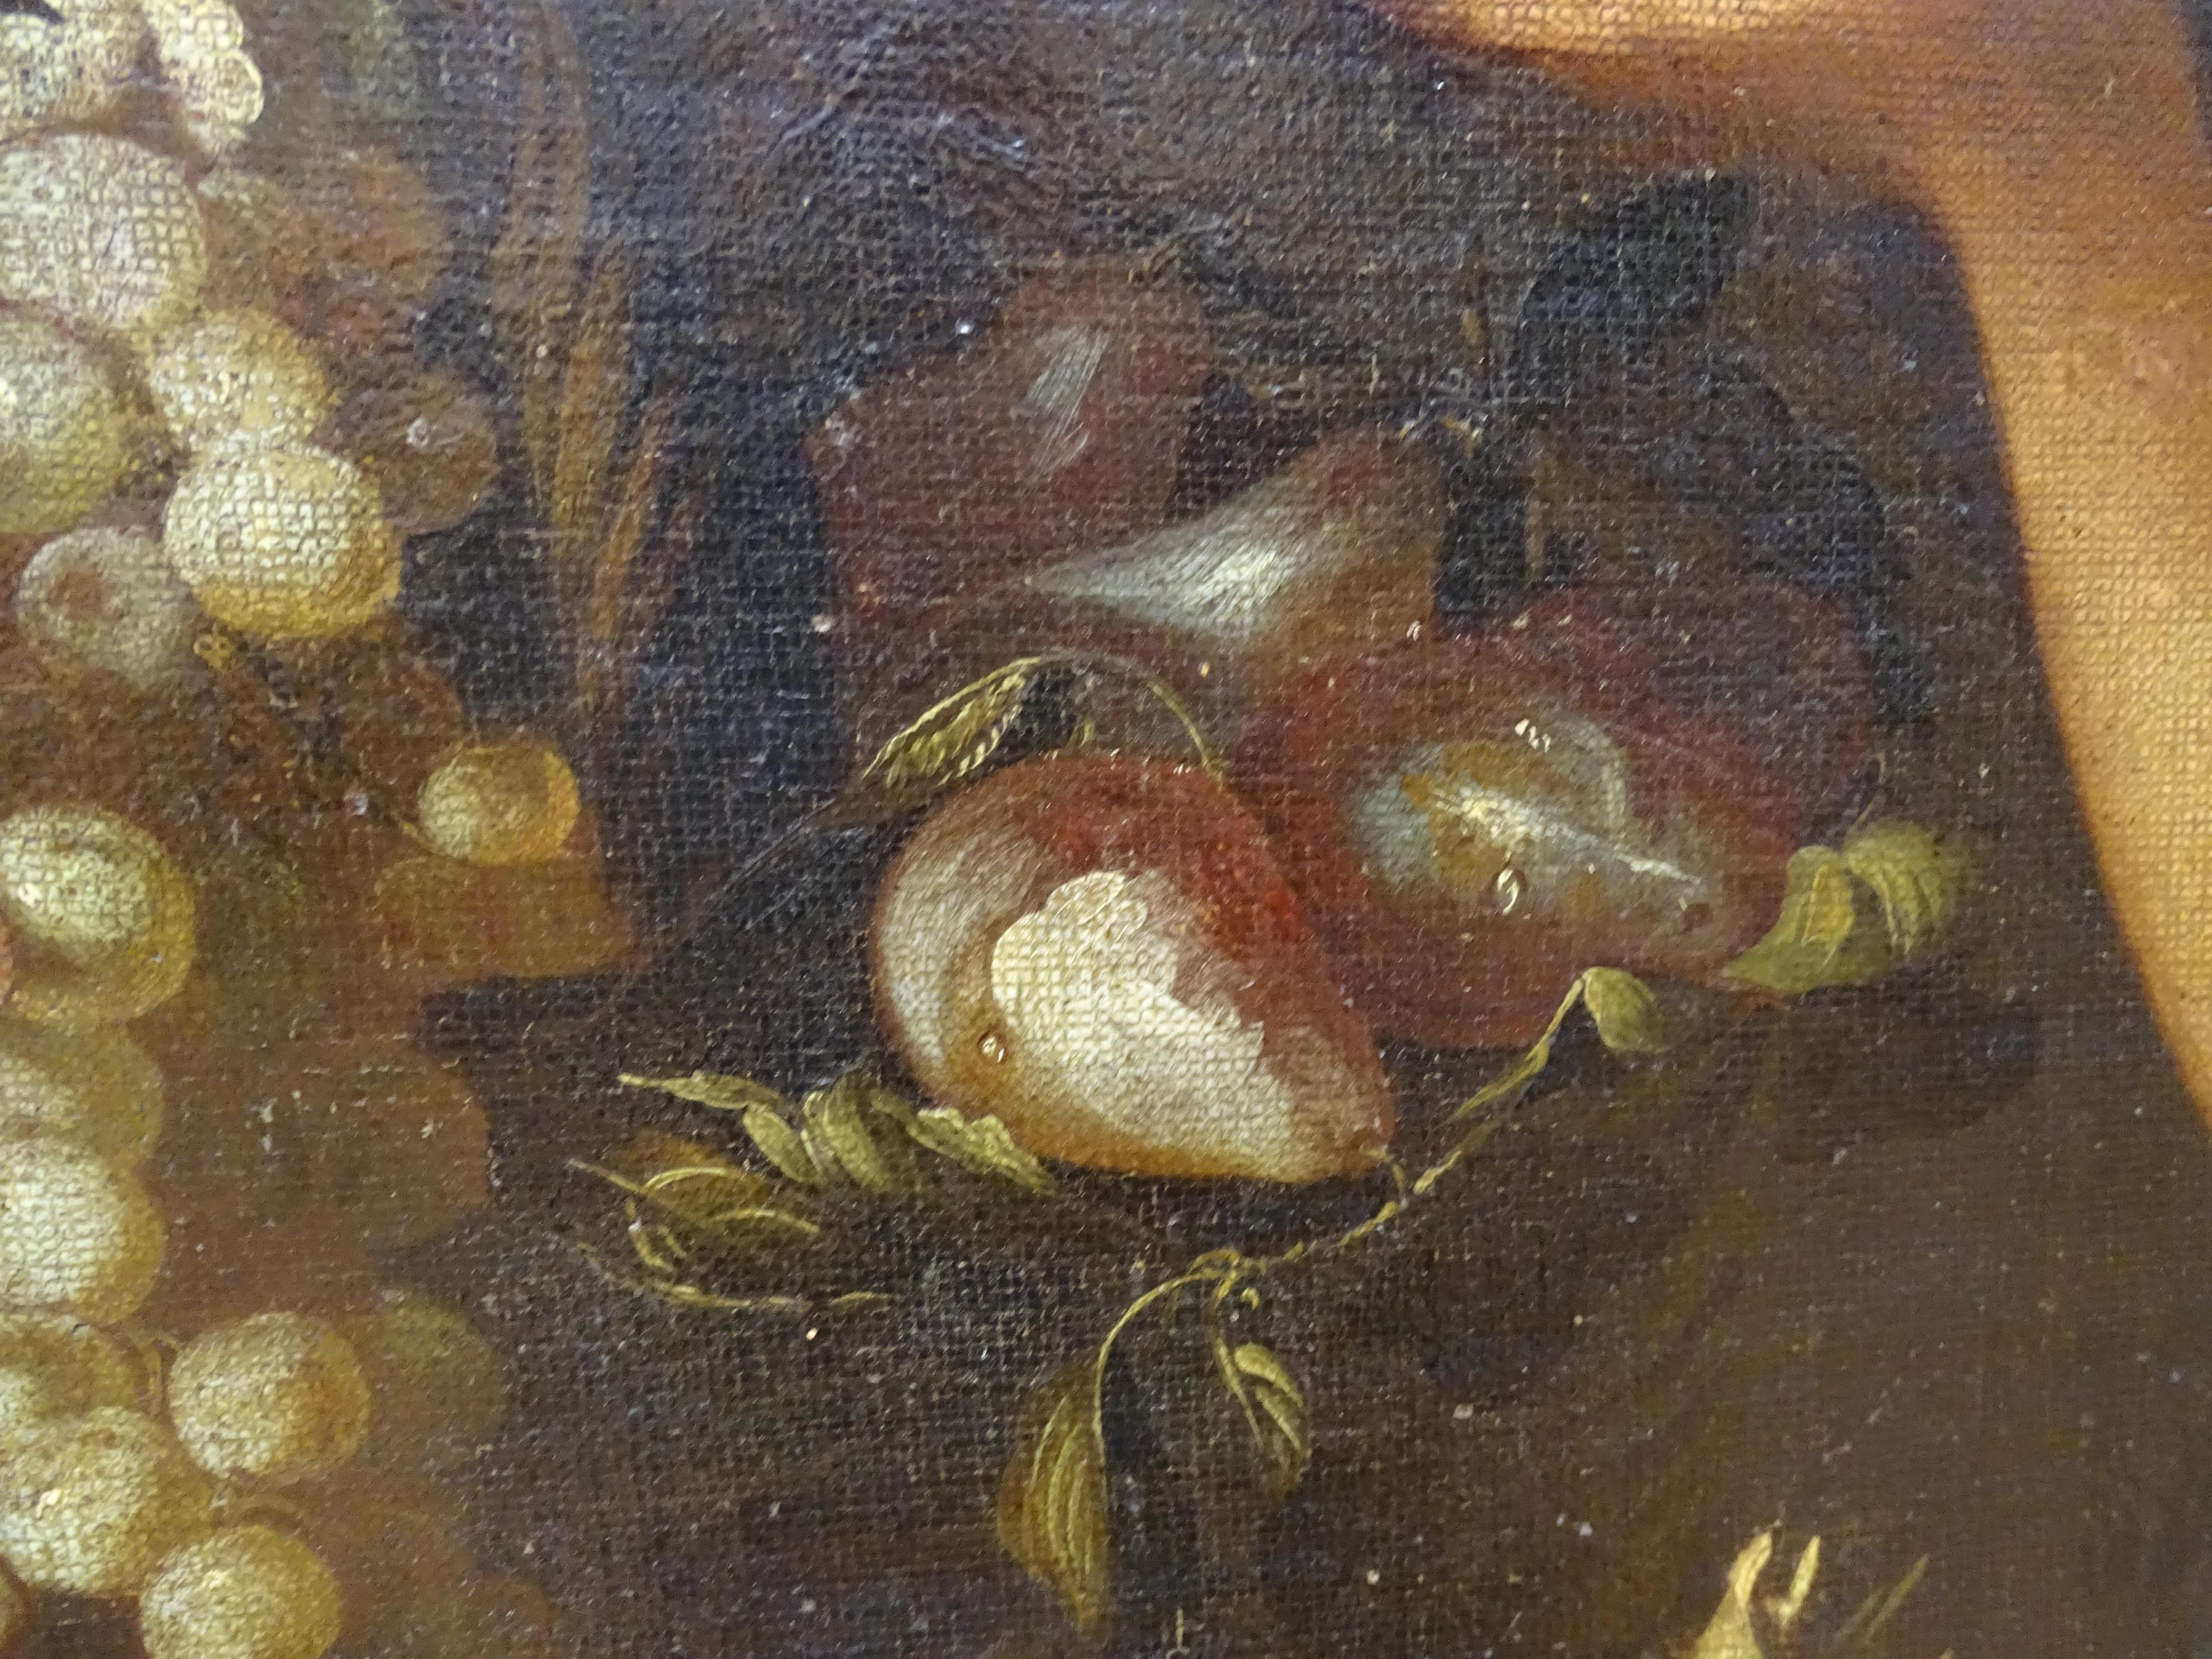 Oil painting on canvas, depicting Still Life with female figure, Italian school of the 17th century.

This splendid composition in Baroque style shows the careful observation of nature by the painter.

The various qualities of the fruit are